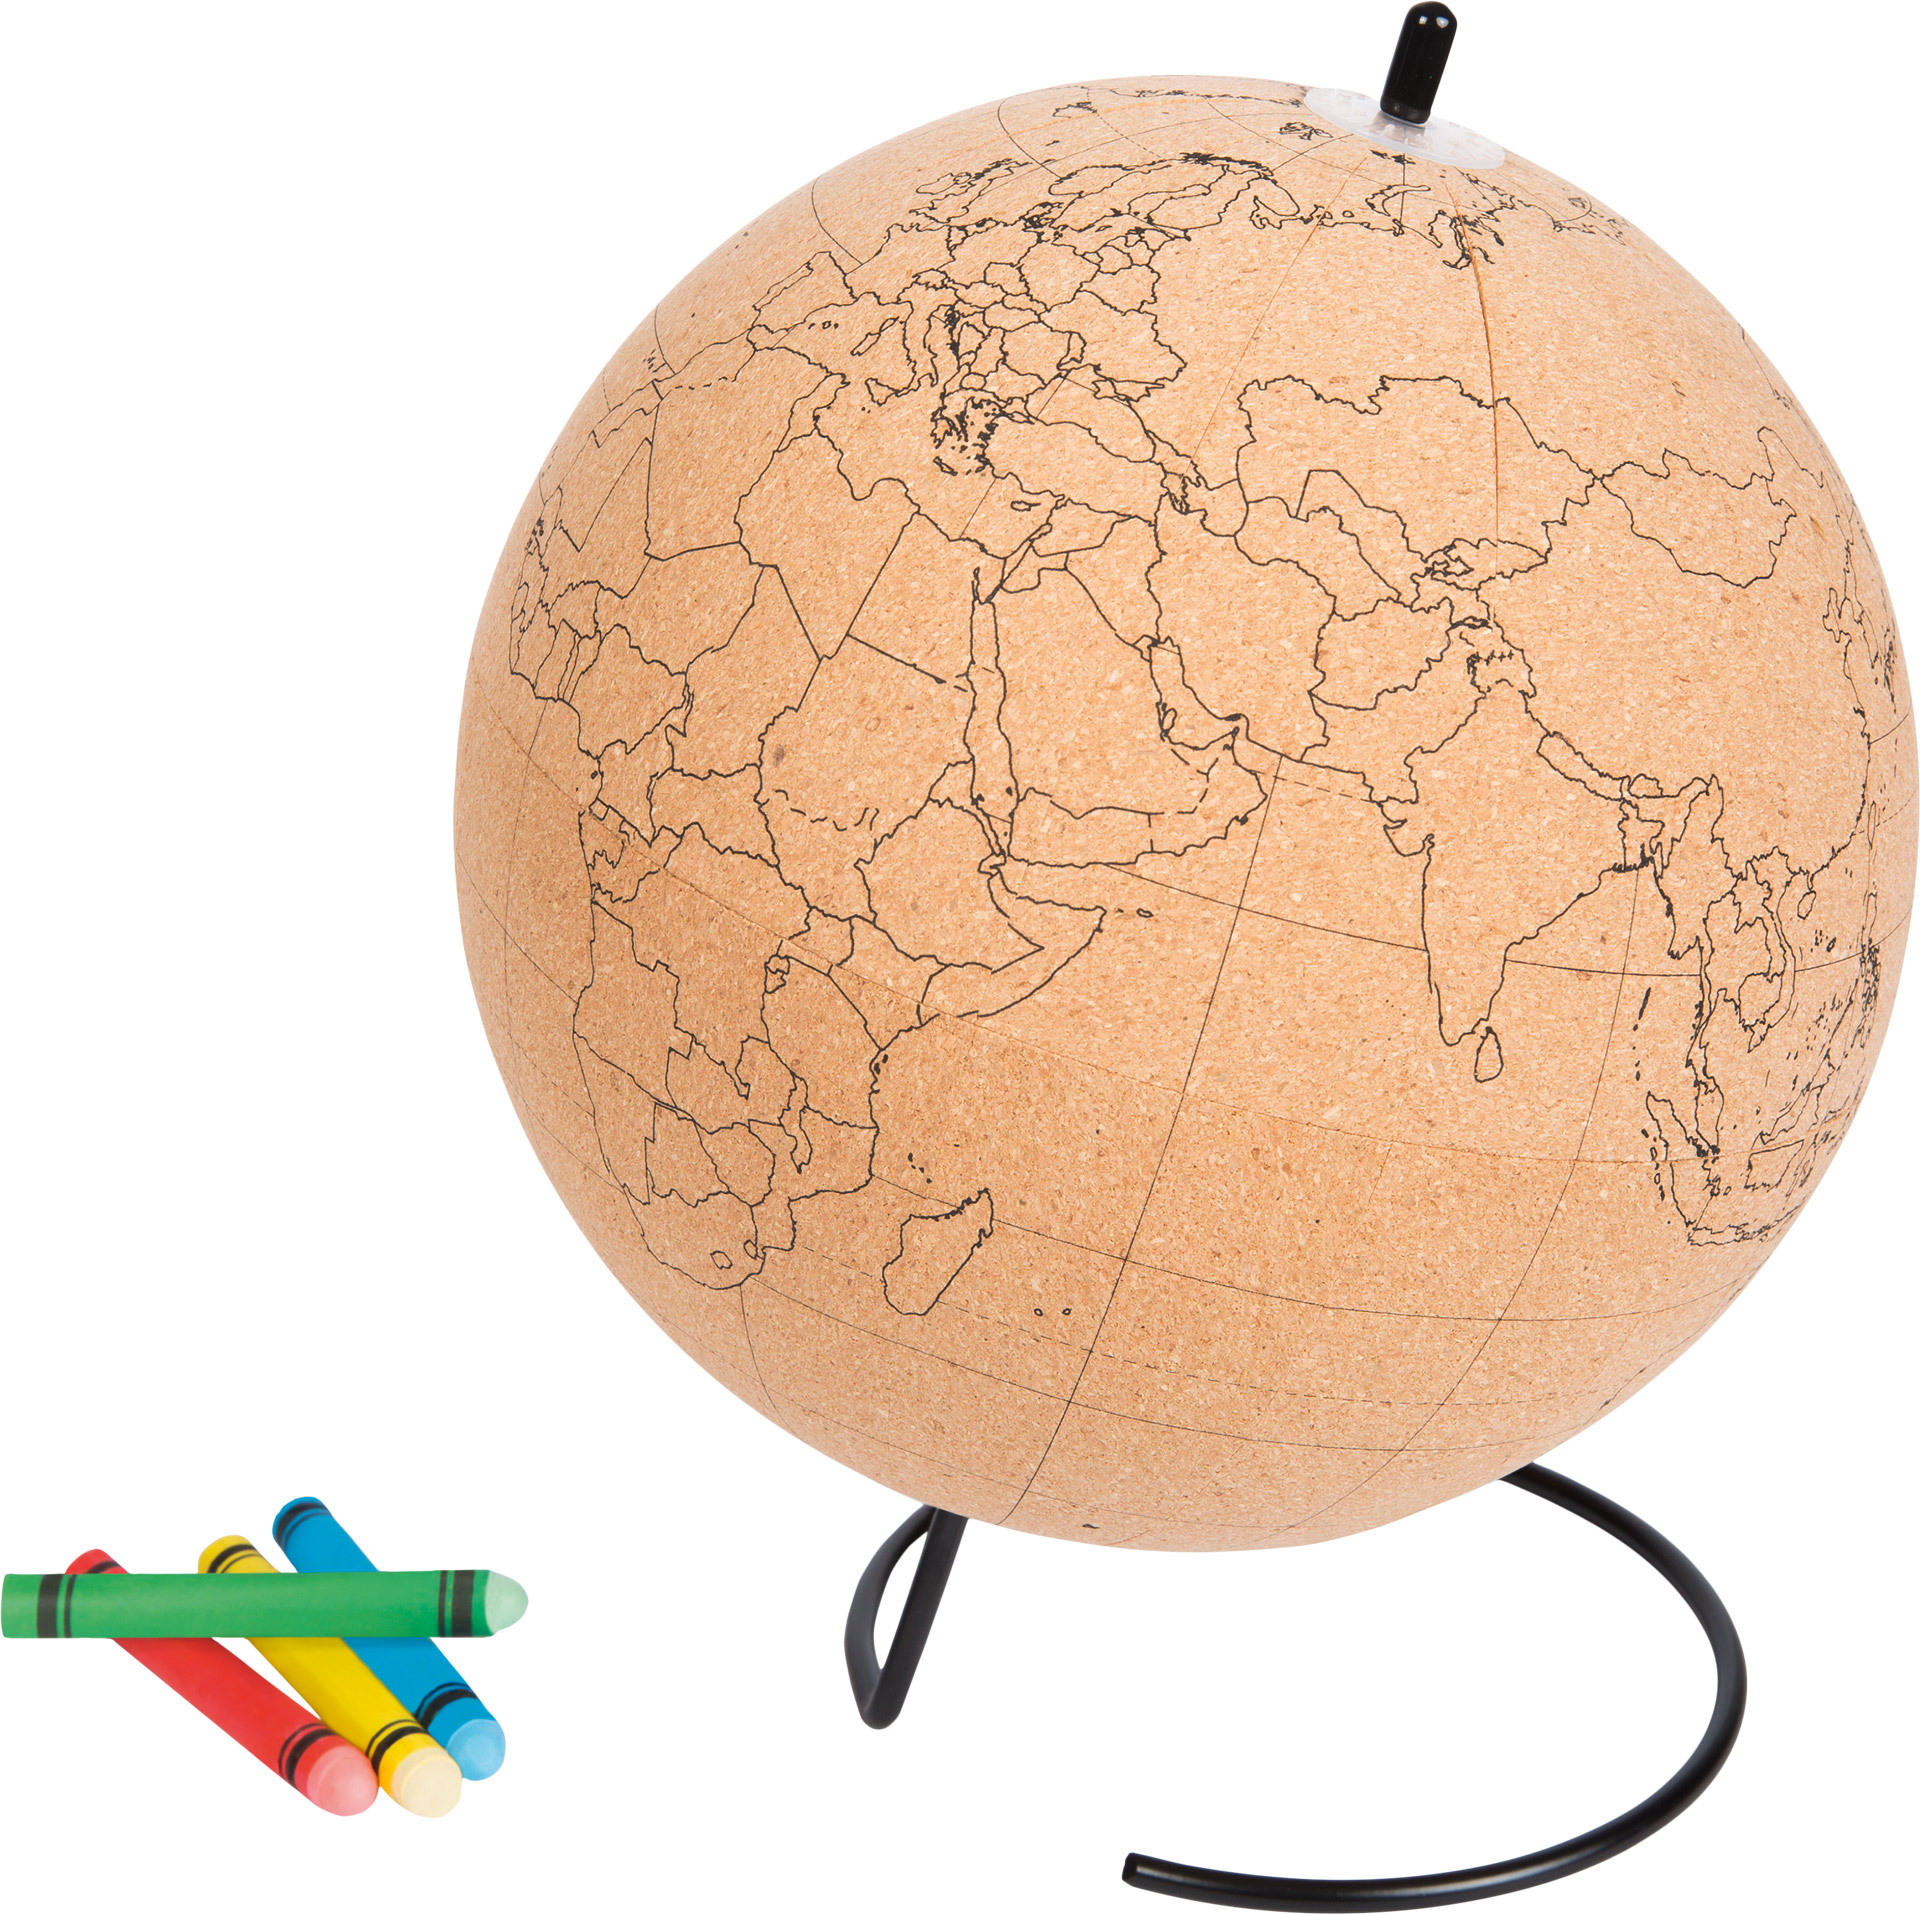 Cork globe for coloring